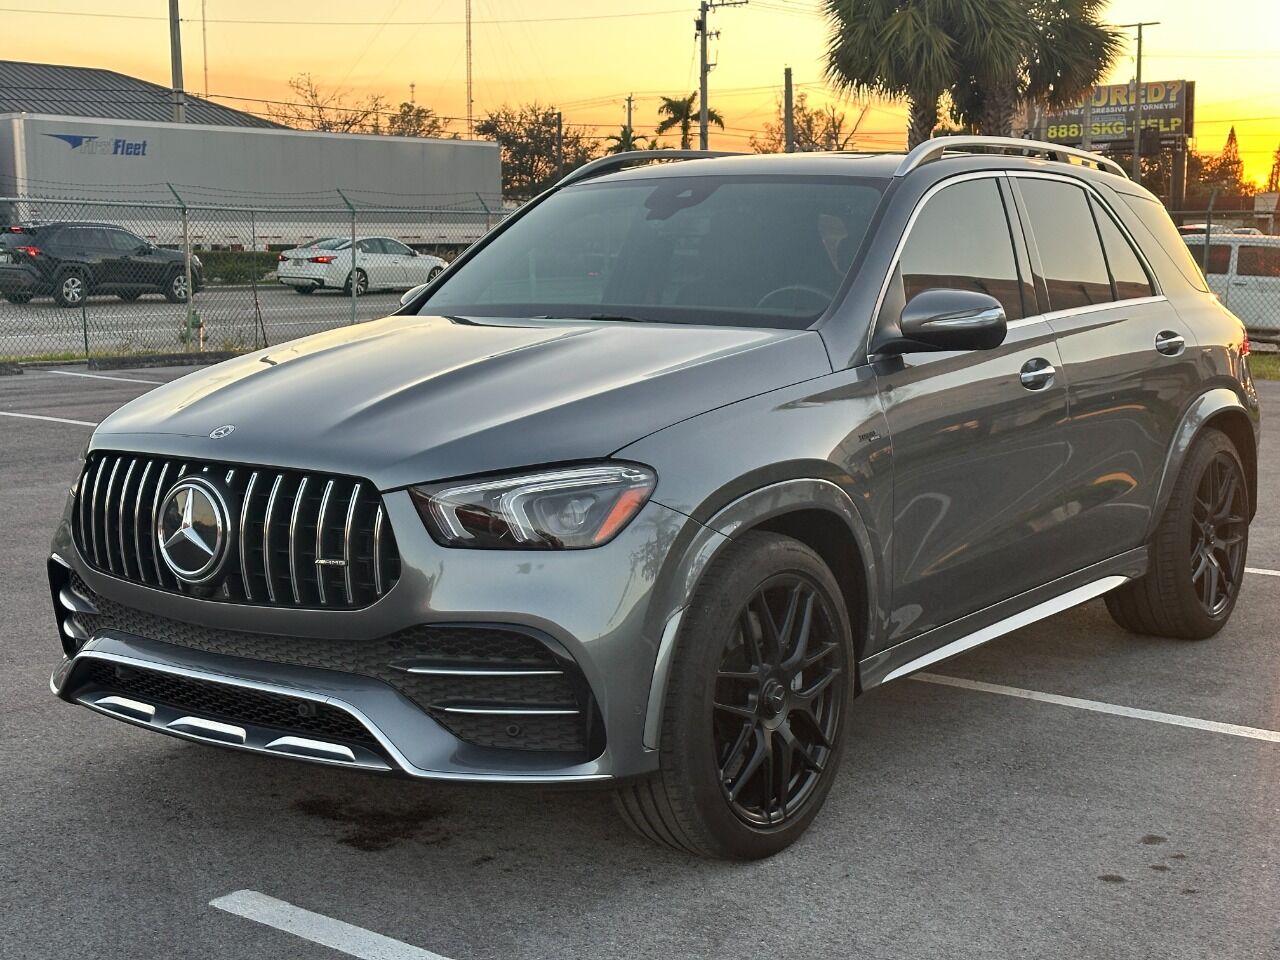 2022 MERCEDES-BENZ GLE-Class SUV / Crossover - $79,900